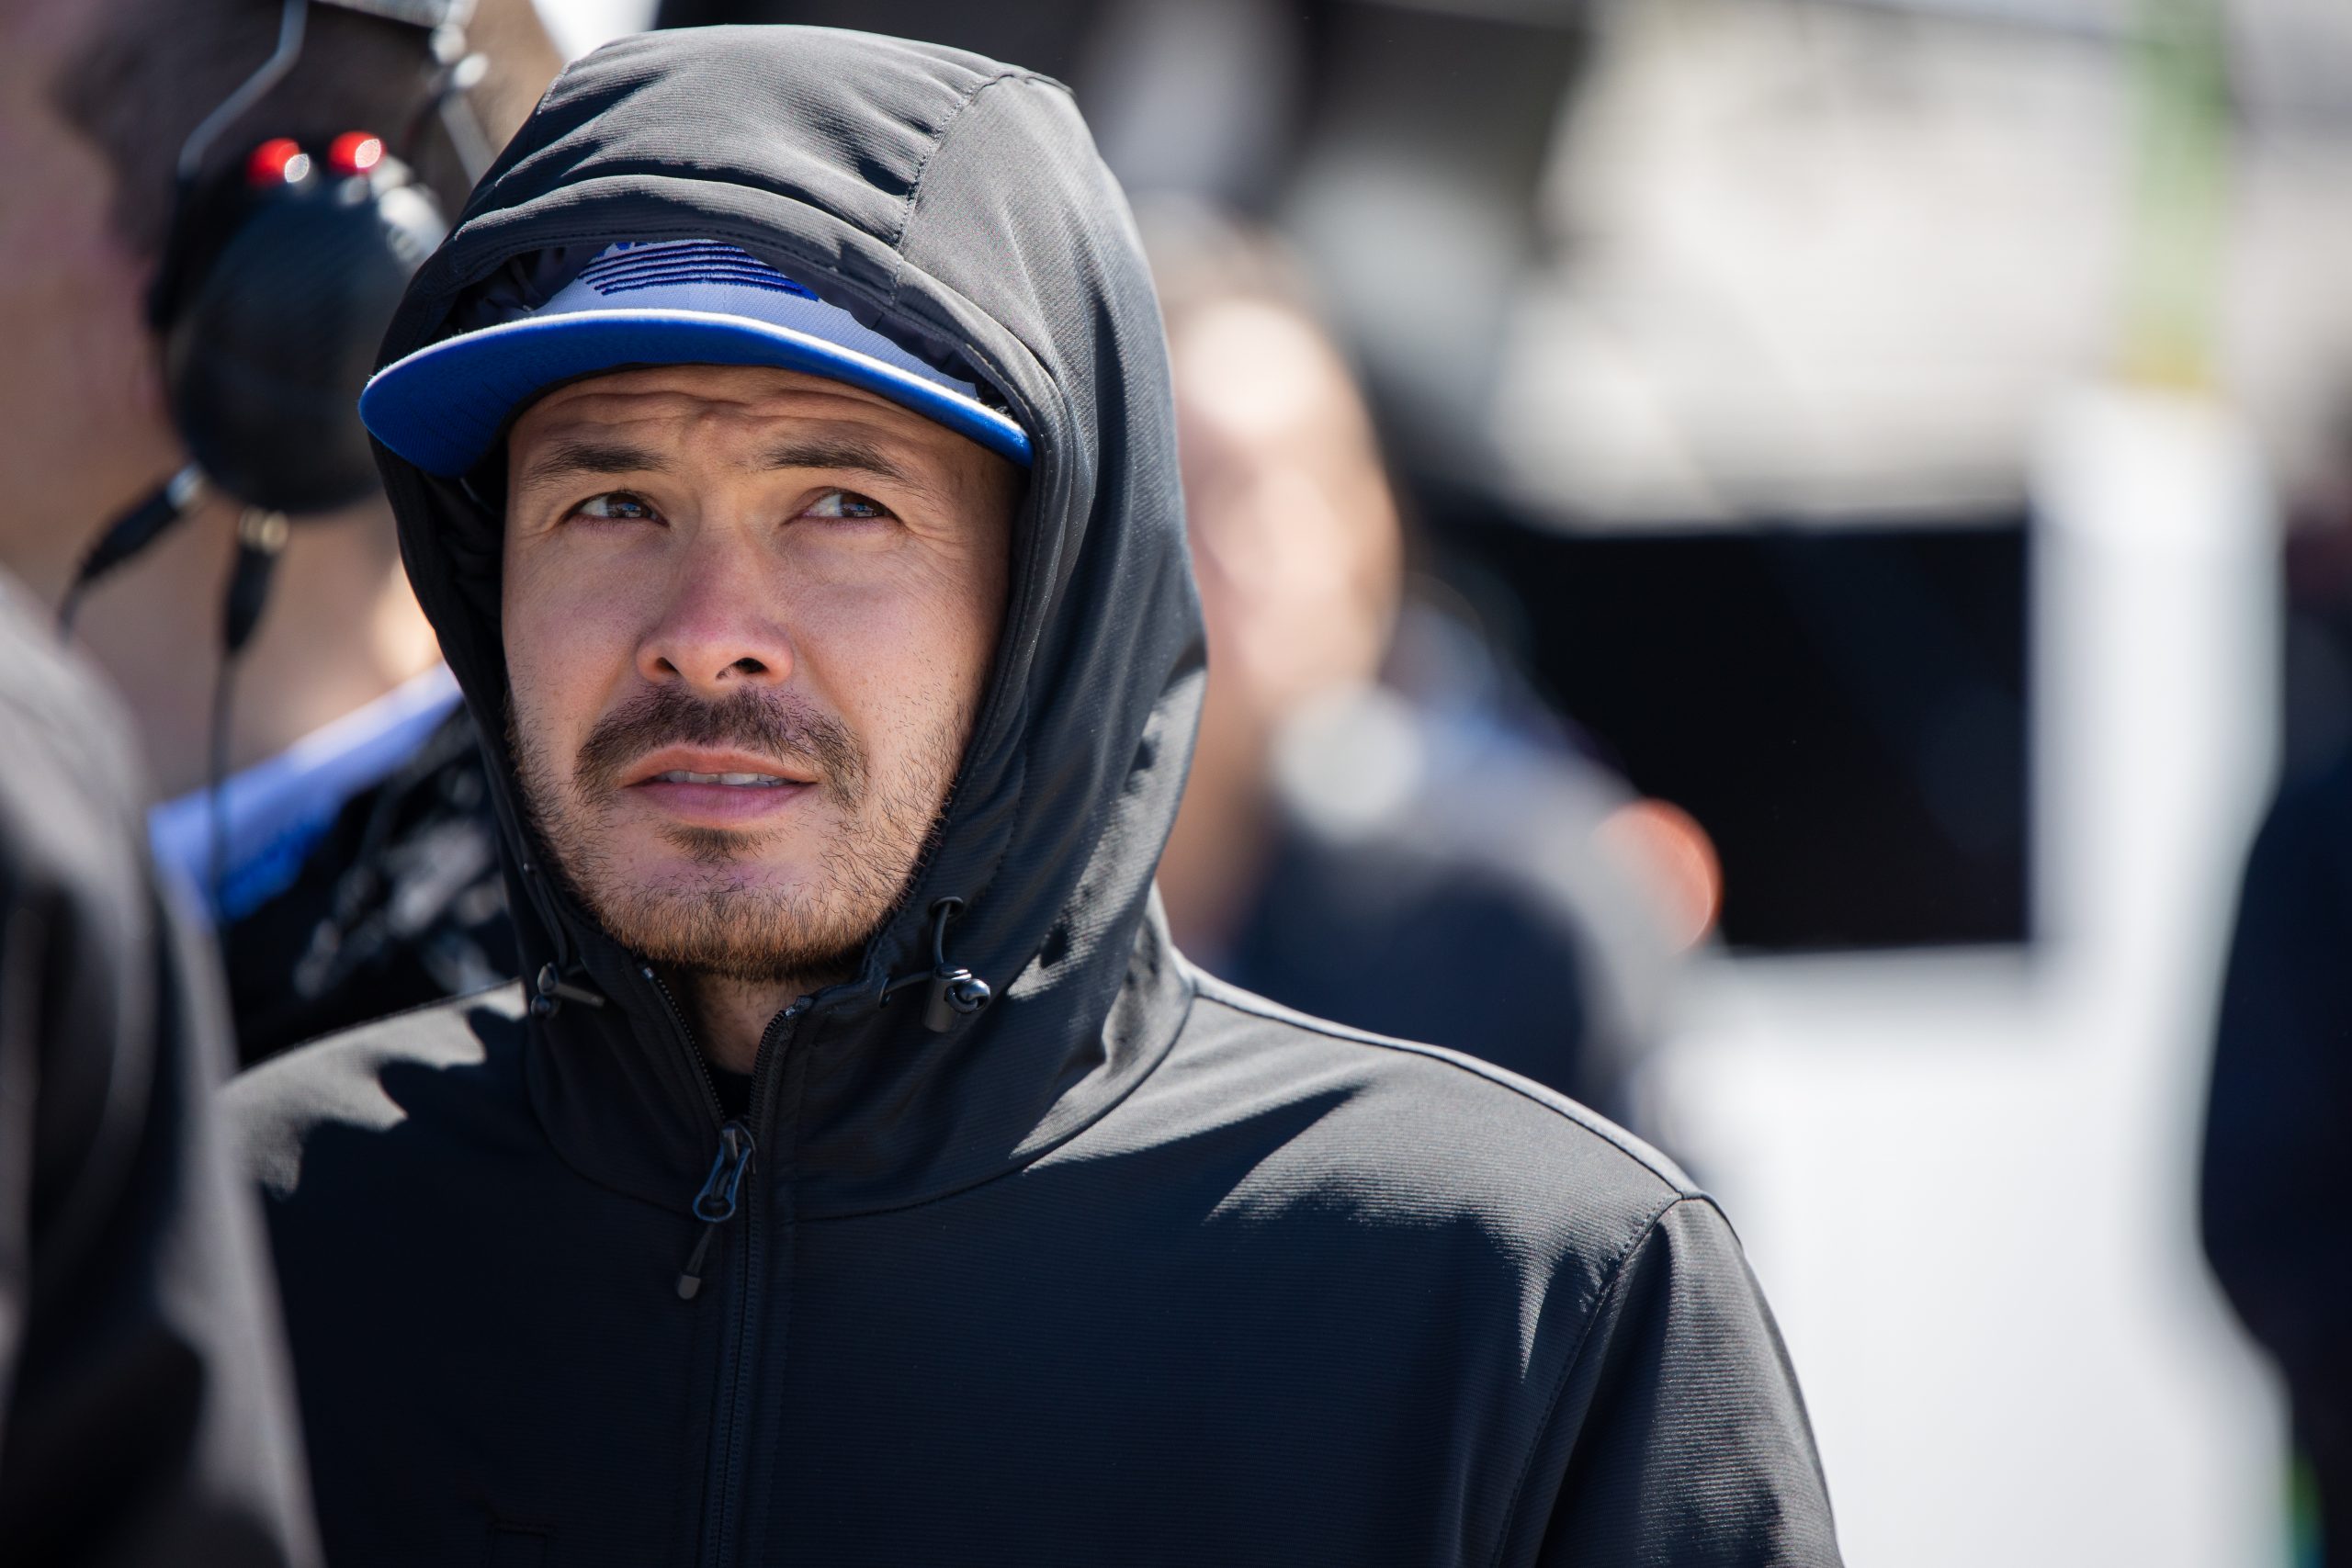 Kyle Larson hopes to turn up the wick at a chilly Atlanta Motor Speedway. (Photo: Riley Thompson | The Podium Finish)